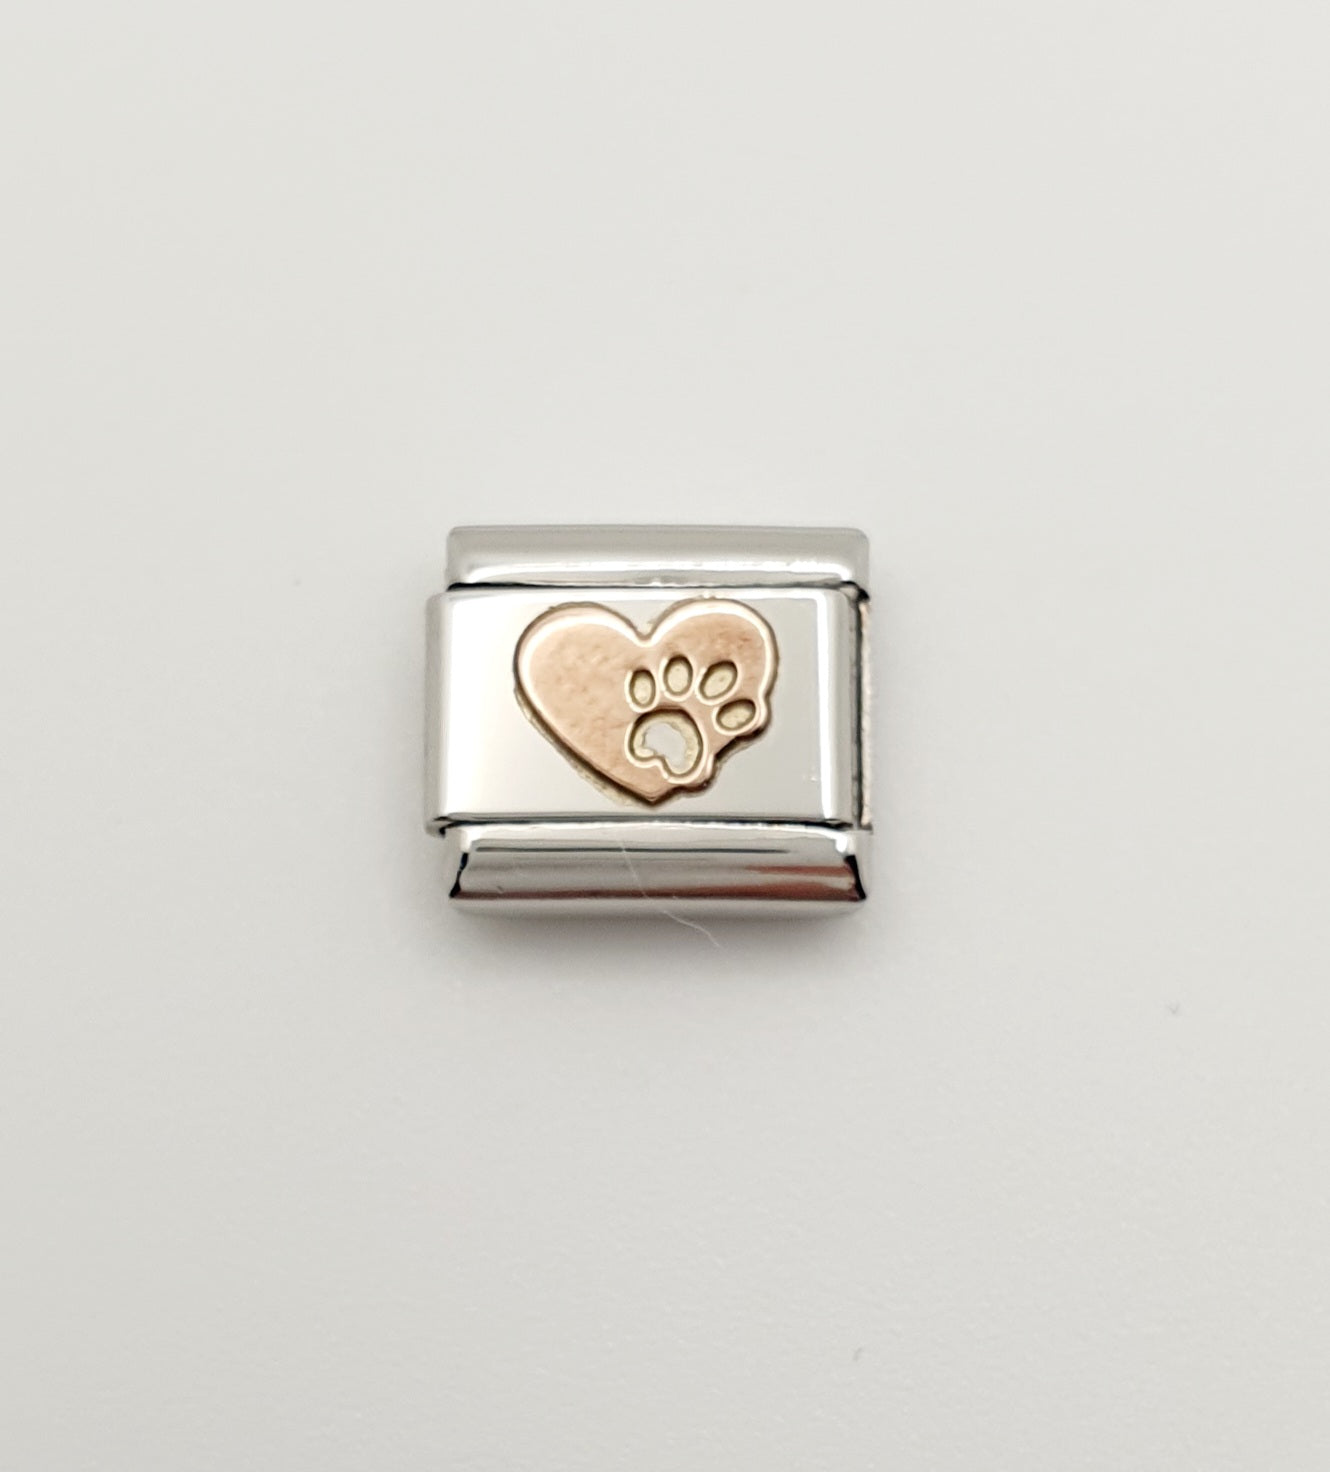 Nomination Charm Link "Heart with Footprint" Stainless Steel with 9k Rose Gold, 430104 12